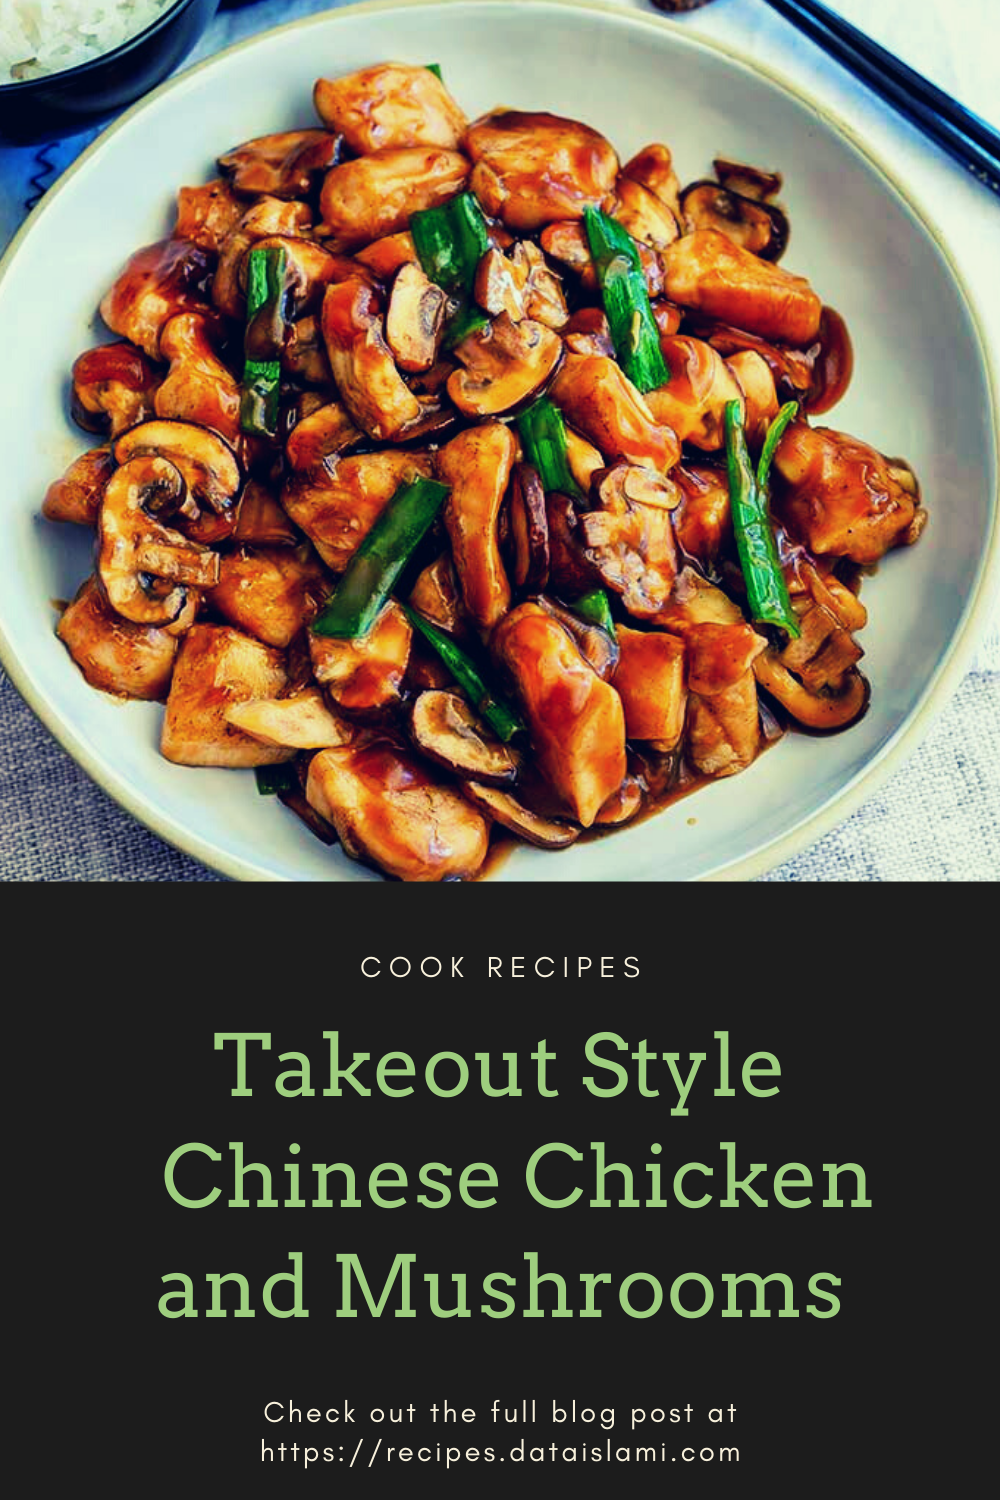 Takeout Style Chinese Chicken and Mushrooms